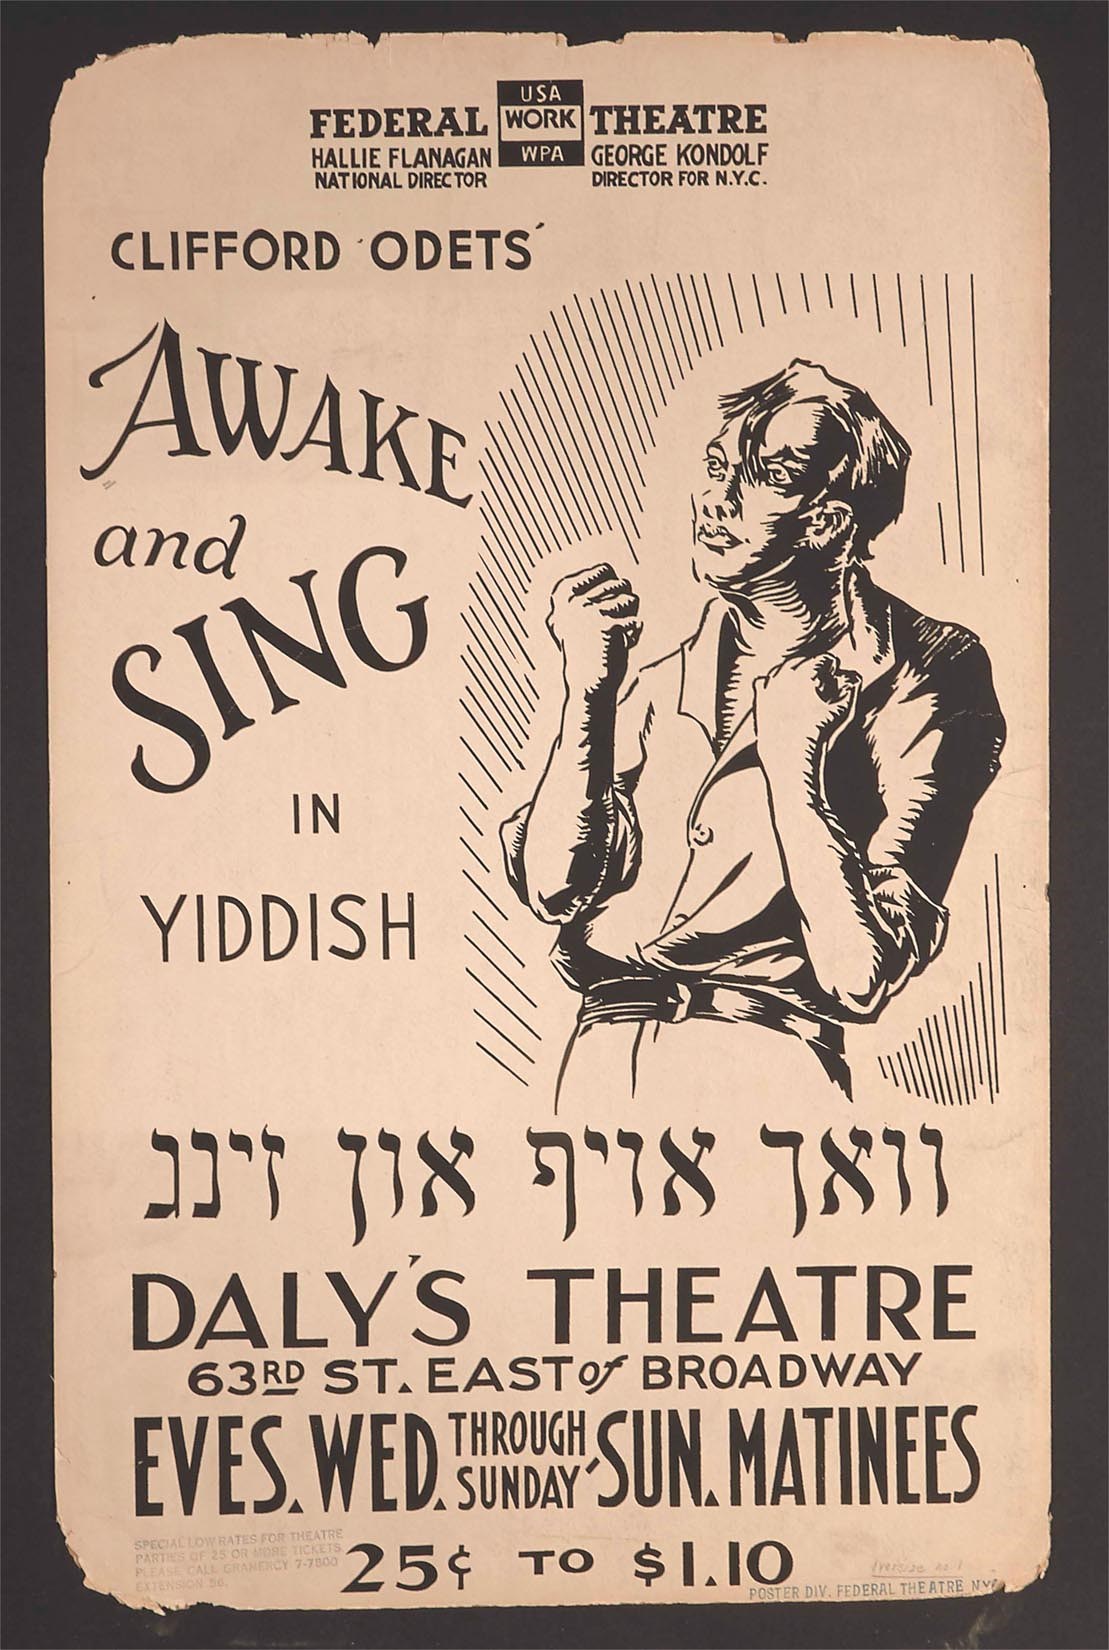 The New Yorker Collection - 1930s "Awake & Sing in Yiddish" by Clifford Odets Federal Theater Poster